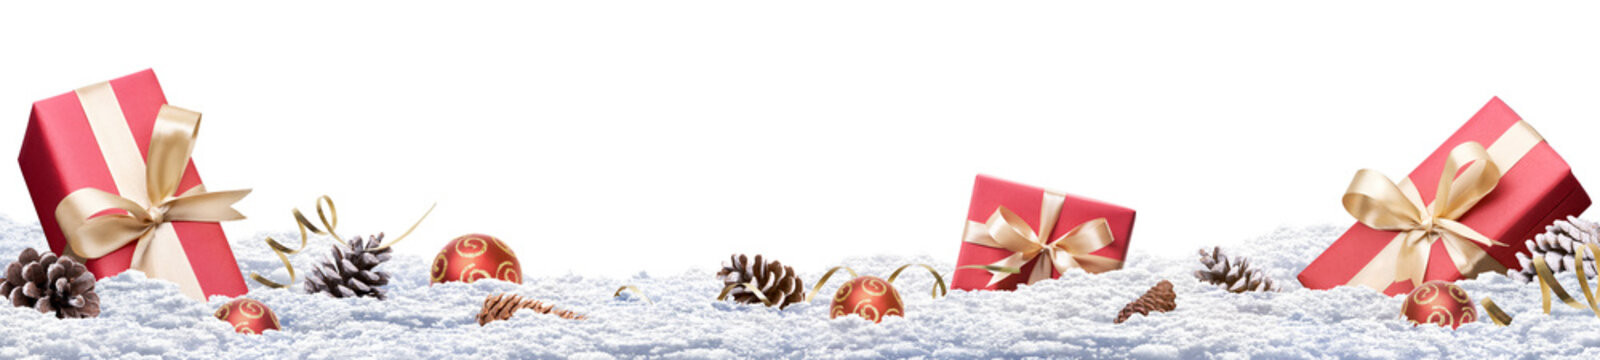 A festive Christmas banner of a winter landscape with presents and decorations in the snow isolated against a transparent background.